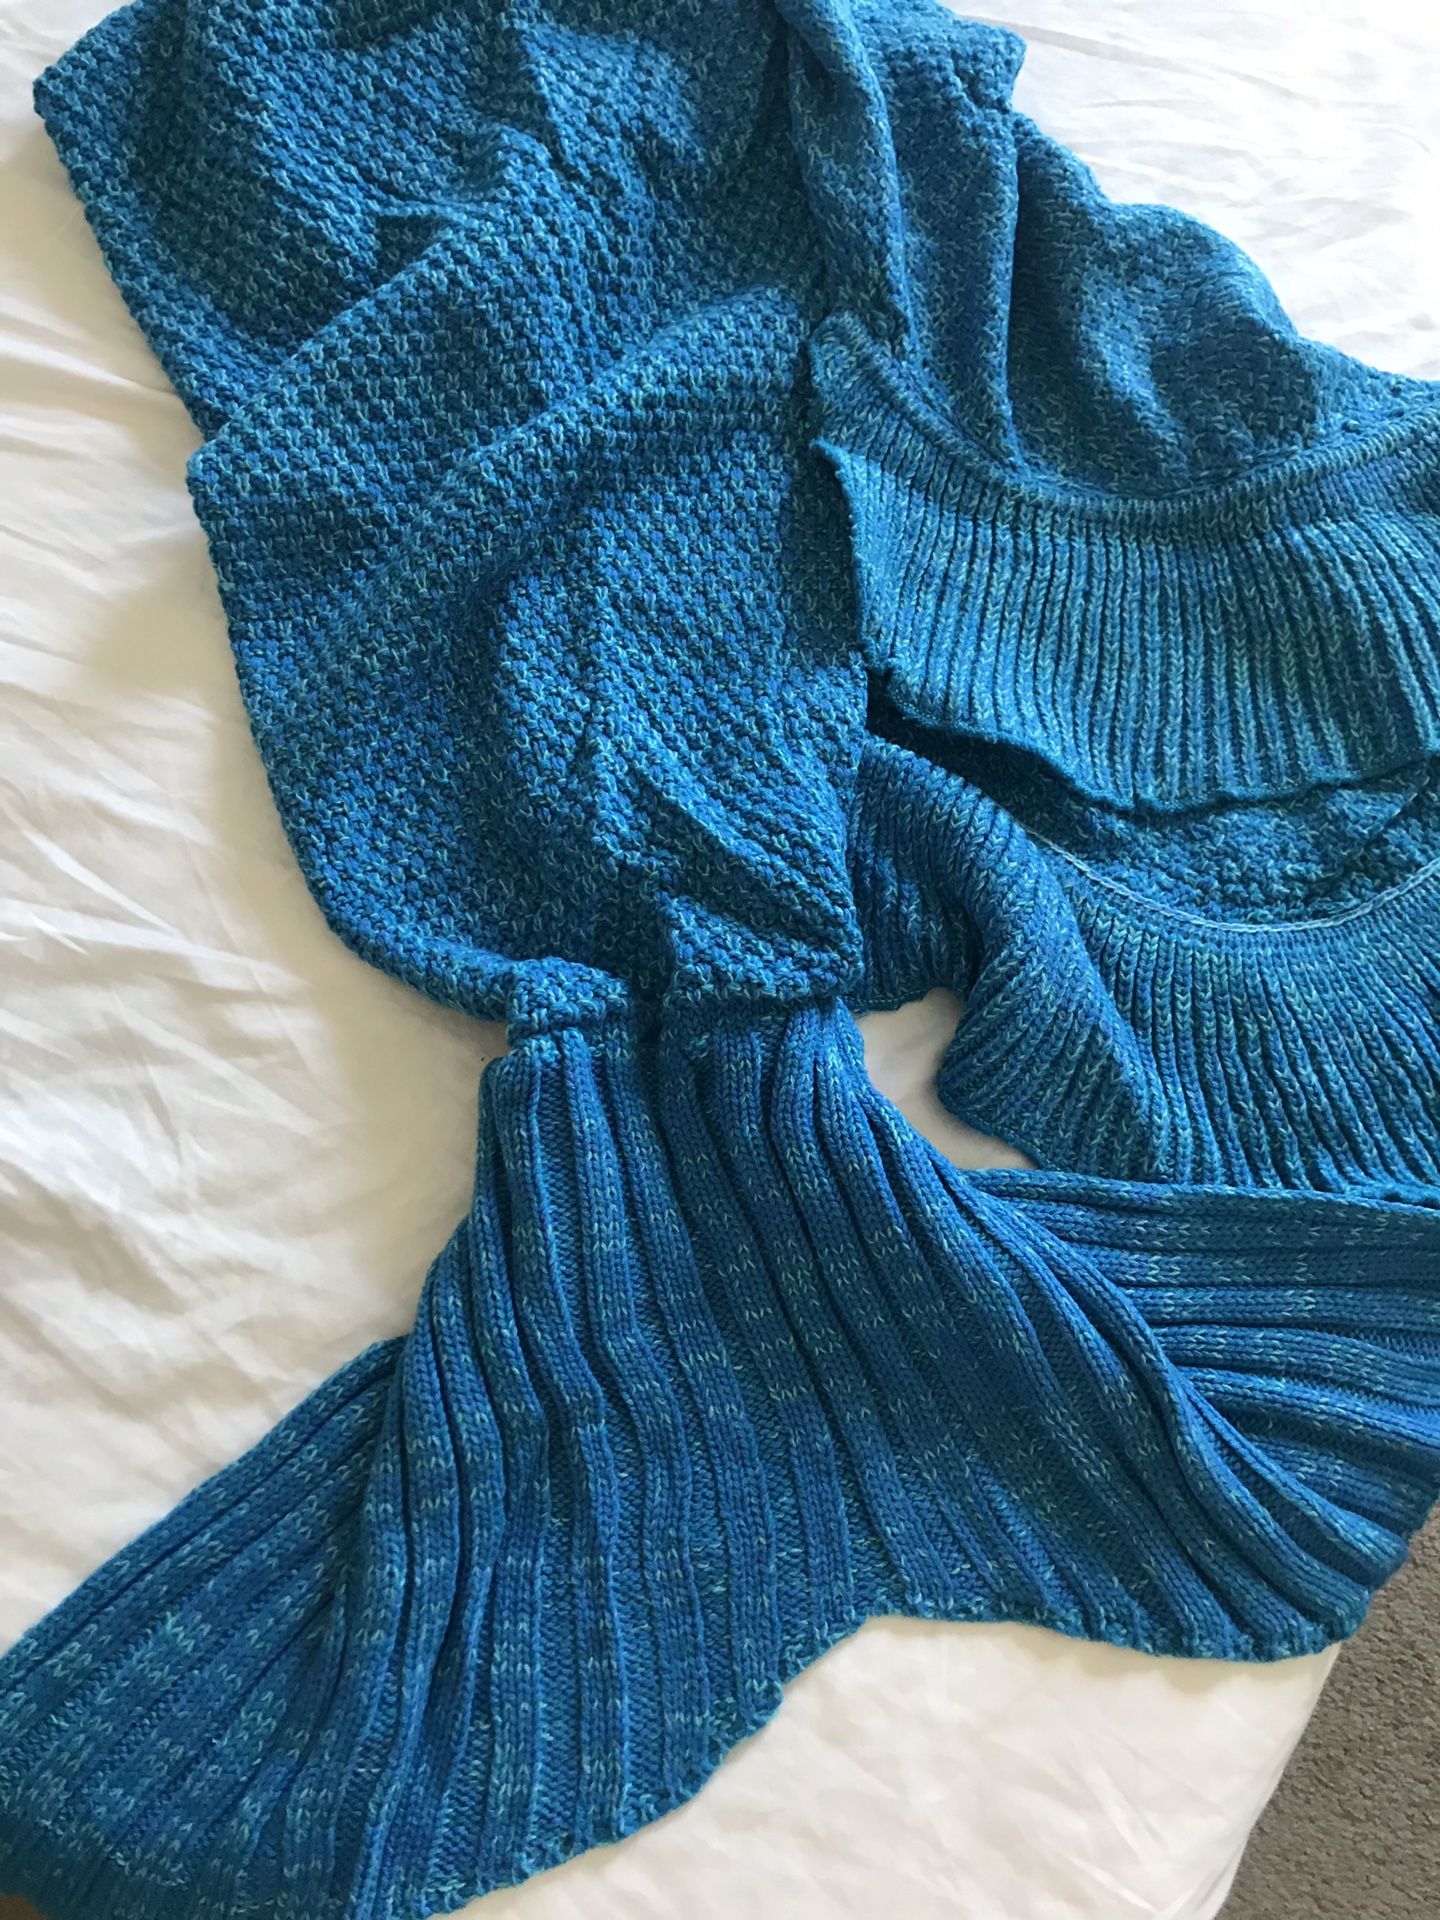 New mermaid tail blanket fun unique gift cozy warm cover